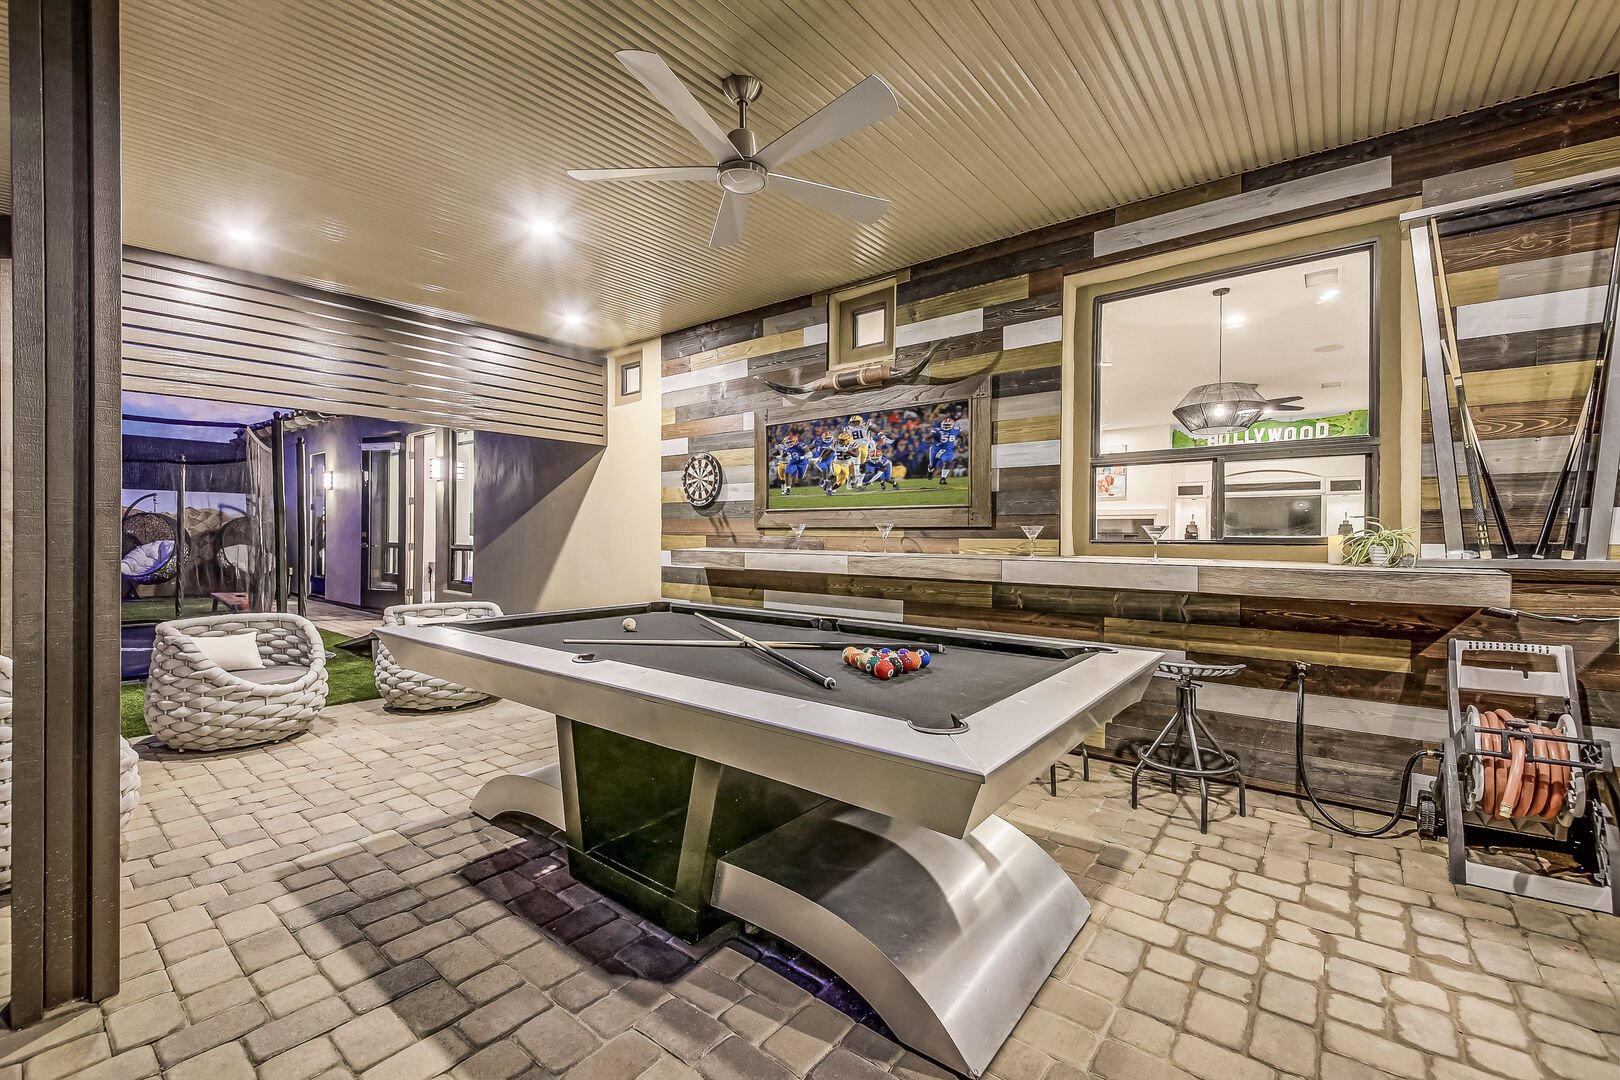 Enjoy a game on the pool table and stay cool under the remote-controlled ceiling fan.